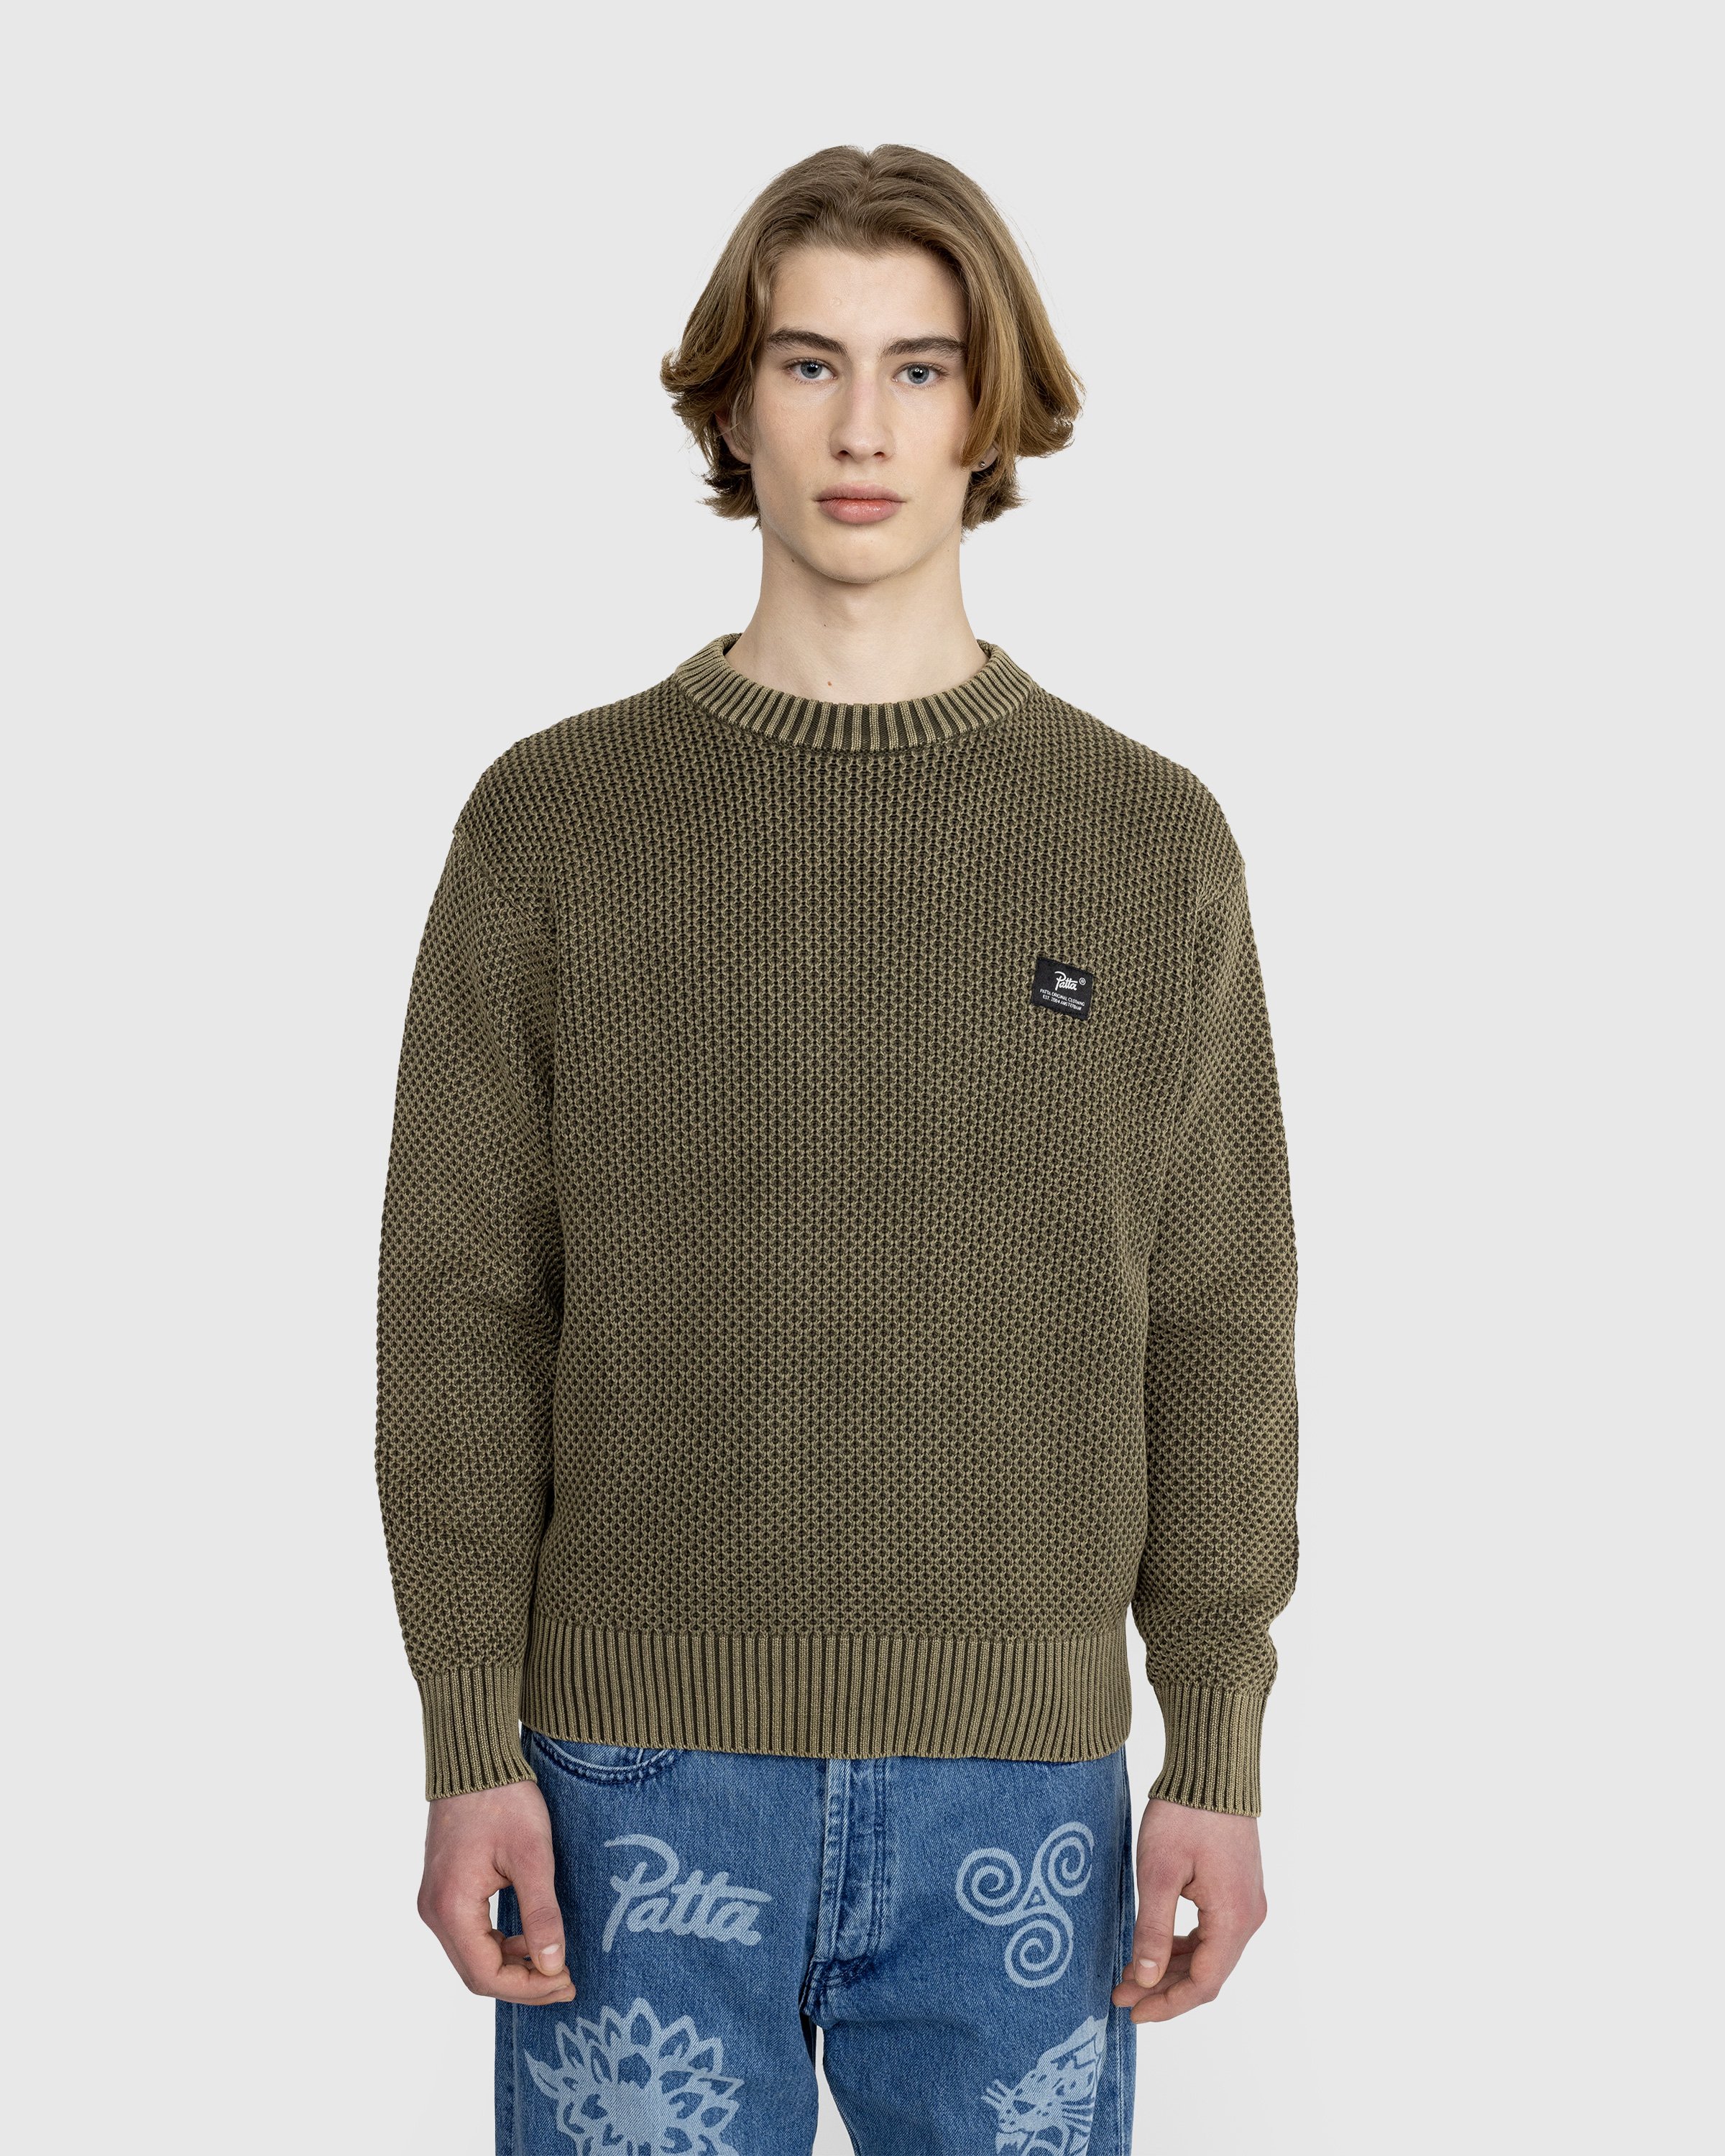 Patta - Honeycomb Knitted Sweater - Clothing - Brown - Image 2